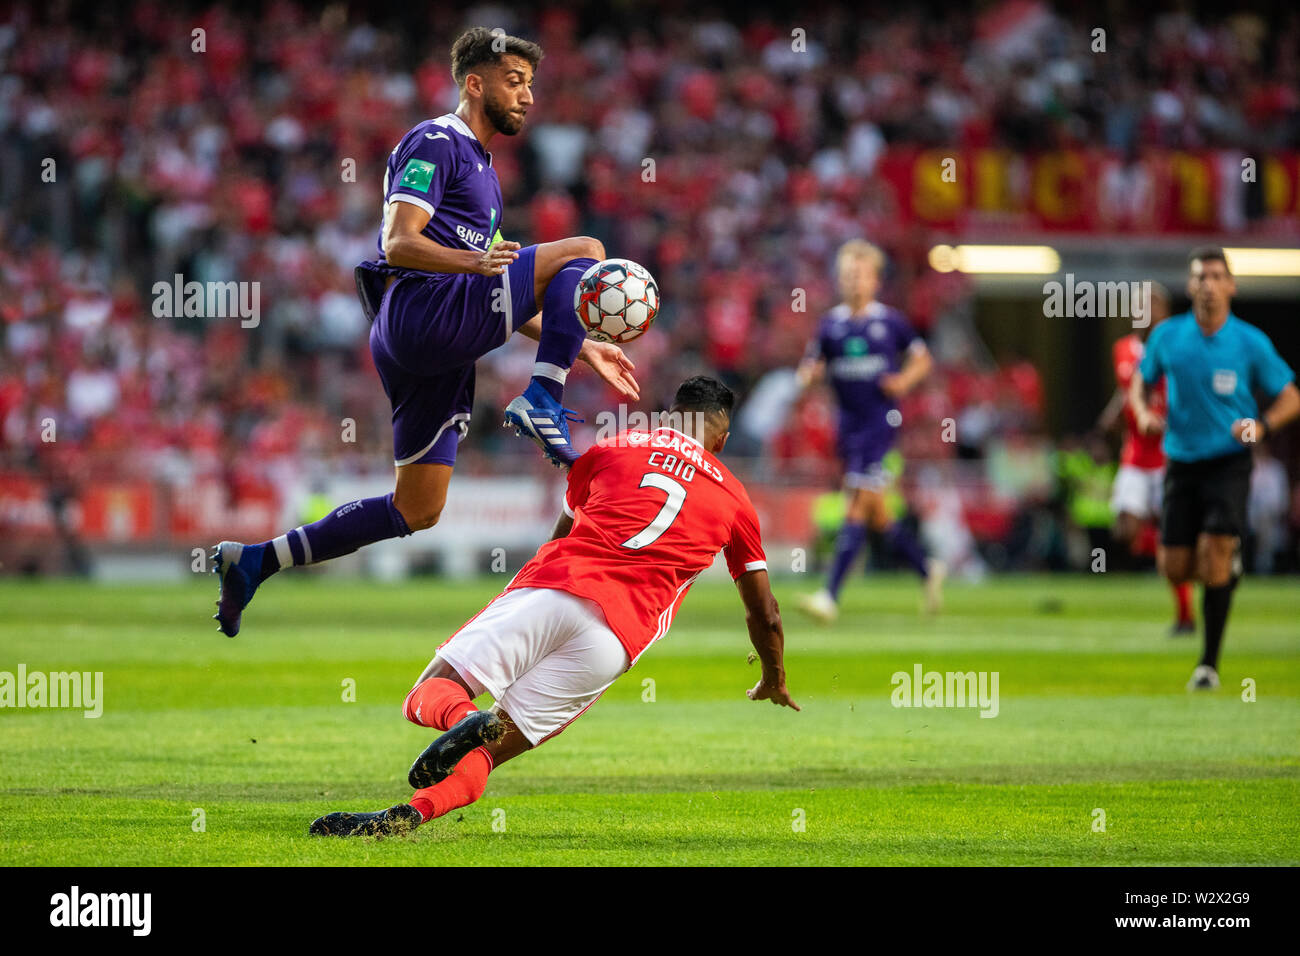 Lisbon, Portugal. 10th July, 2019. Josue Sa of RSC Anderlecht vies for the ball with Caio Lucas of SL Benfica during the Pre-Season football match 2019/2020 between SL Benfica vs Royal Sporting Club Anderlecht.(Final score: SL Benfica 1 - 2 Royal Sporting Club Anderlecht) Credit: SOPA Images Limited/Alamy Live News Stock Photo